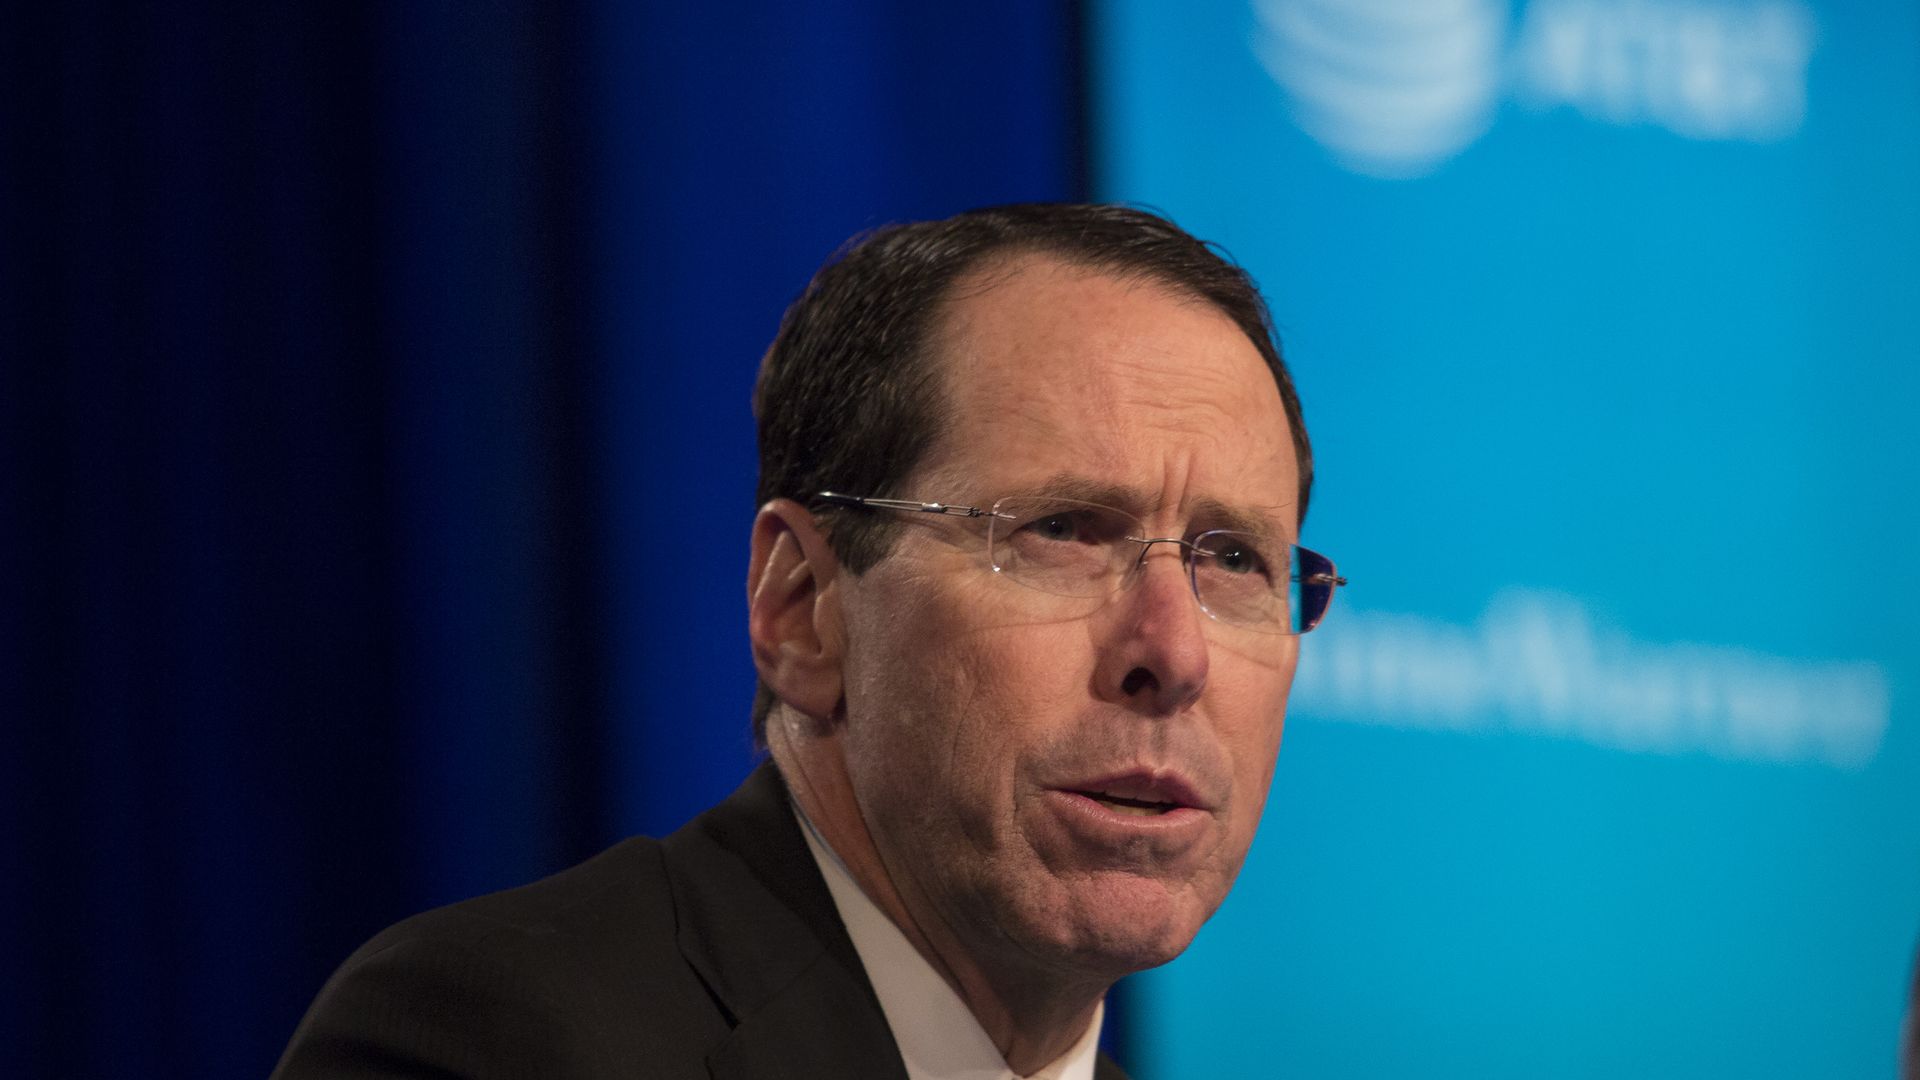 Randall Stephenson in front of a blue backdrop